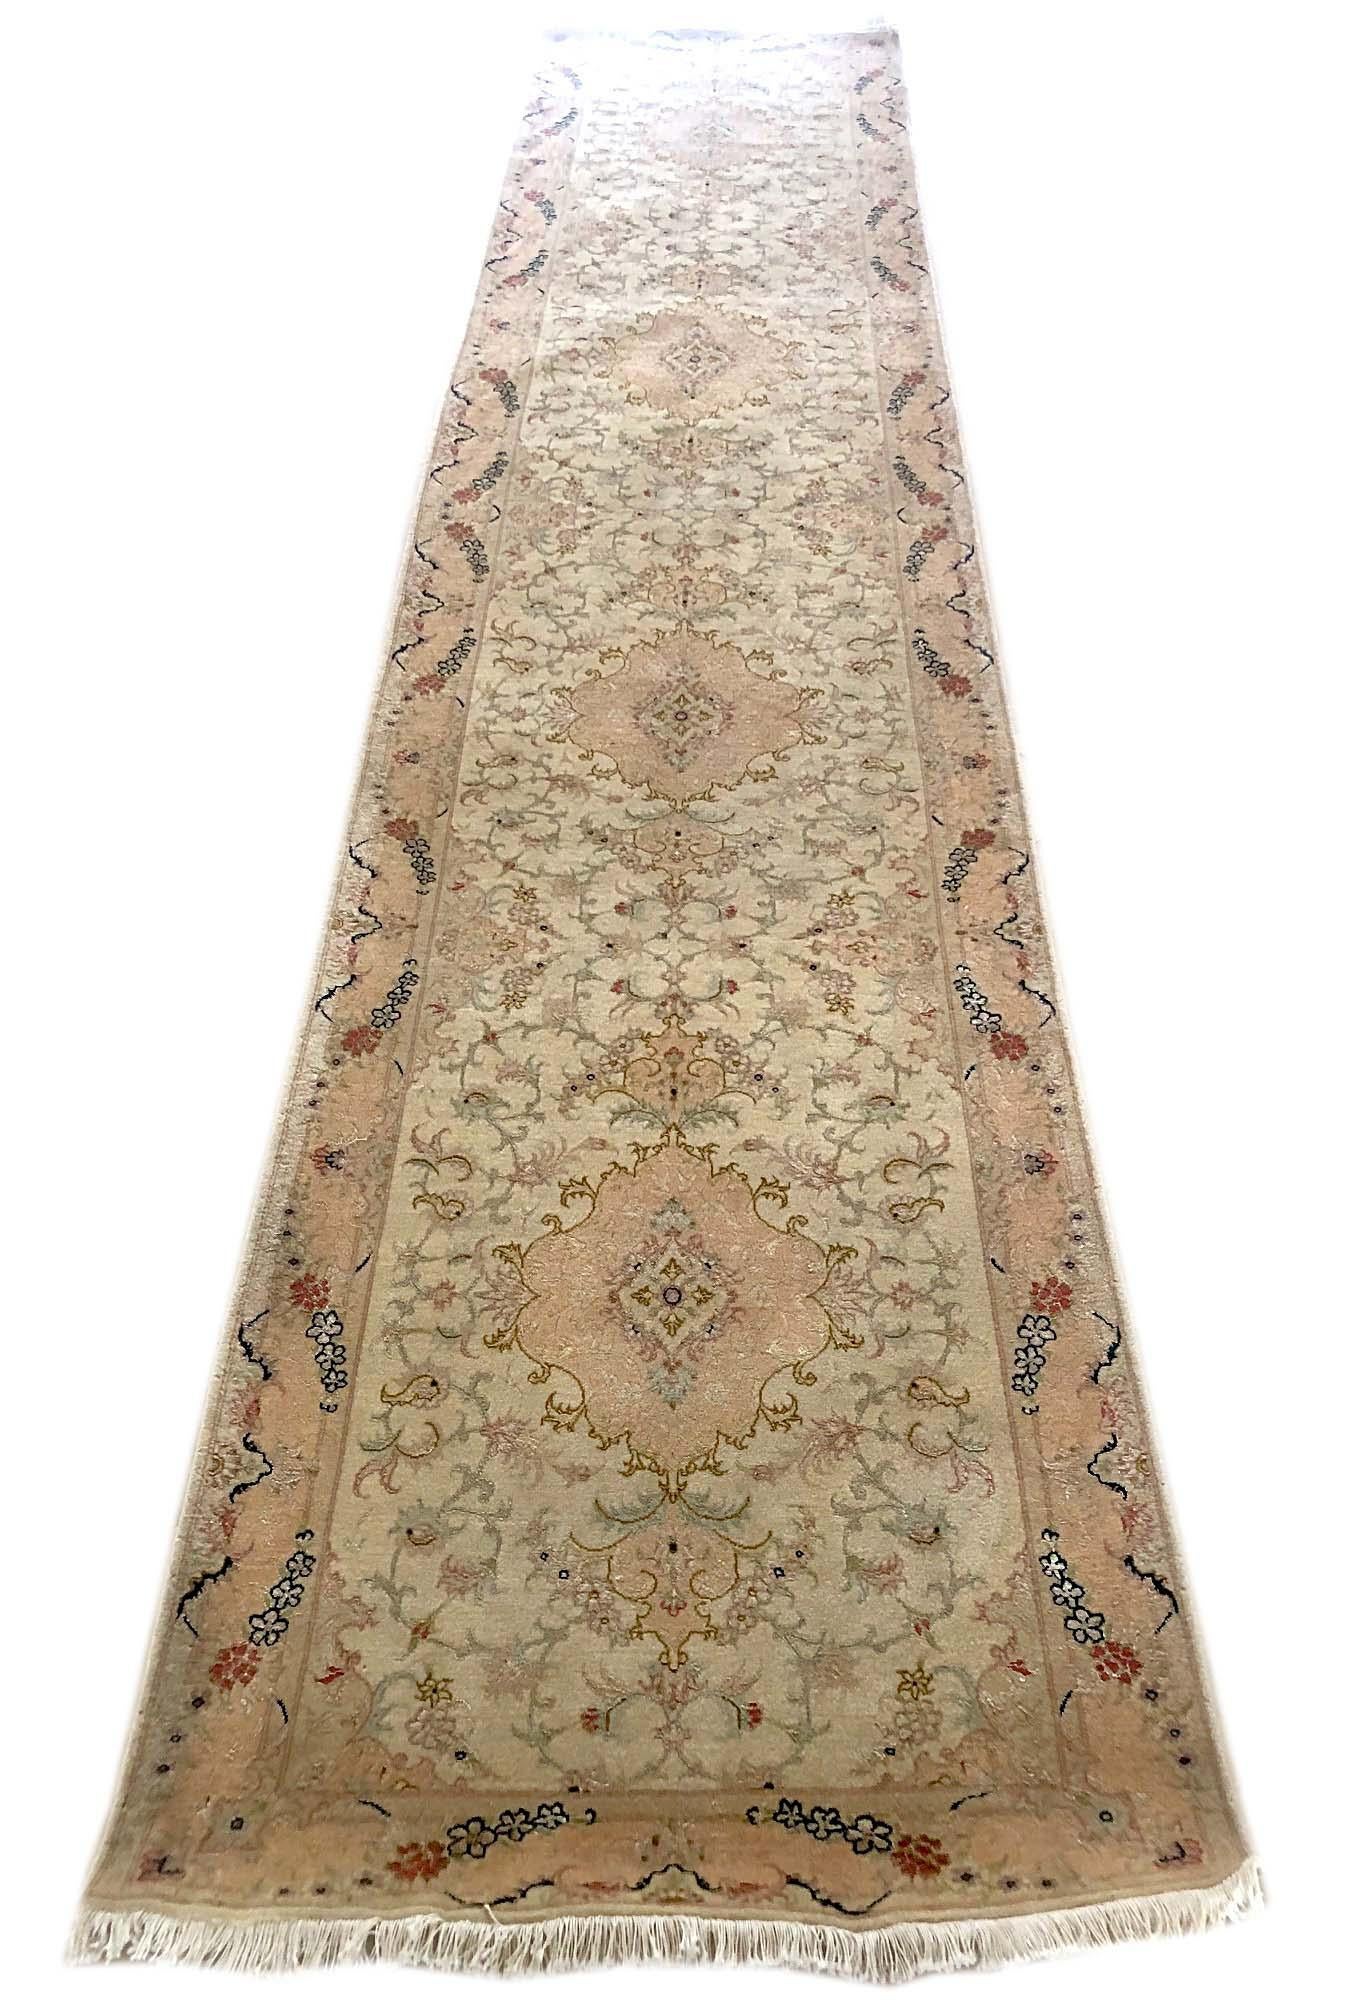 This Persian Tabriz runner has wool & silk pile and cotton foundation. This rug features a beautiful floral rug pattern that has cream base color with light peach border. The size is 2 feet 10 inch wide and 10 feet 1 inch long. This piece has been